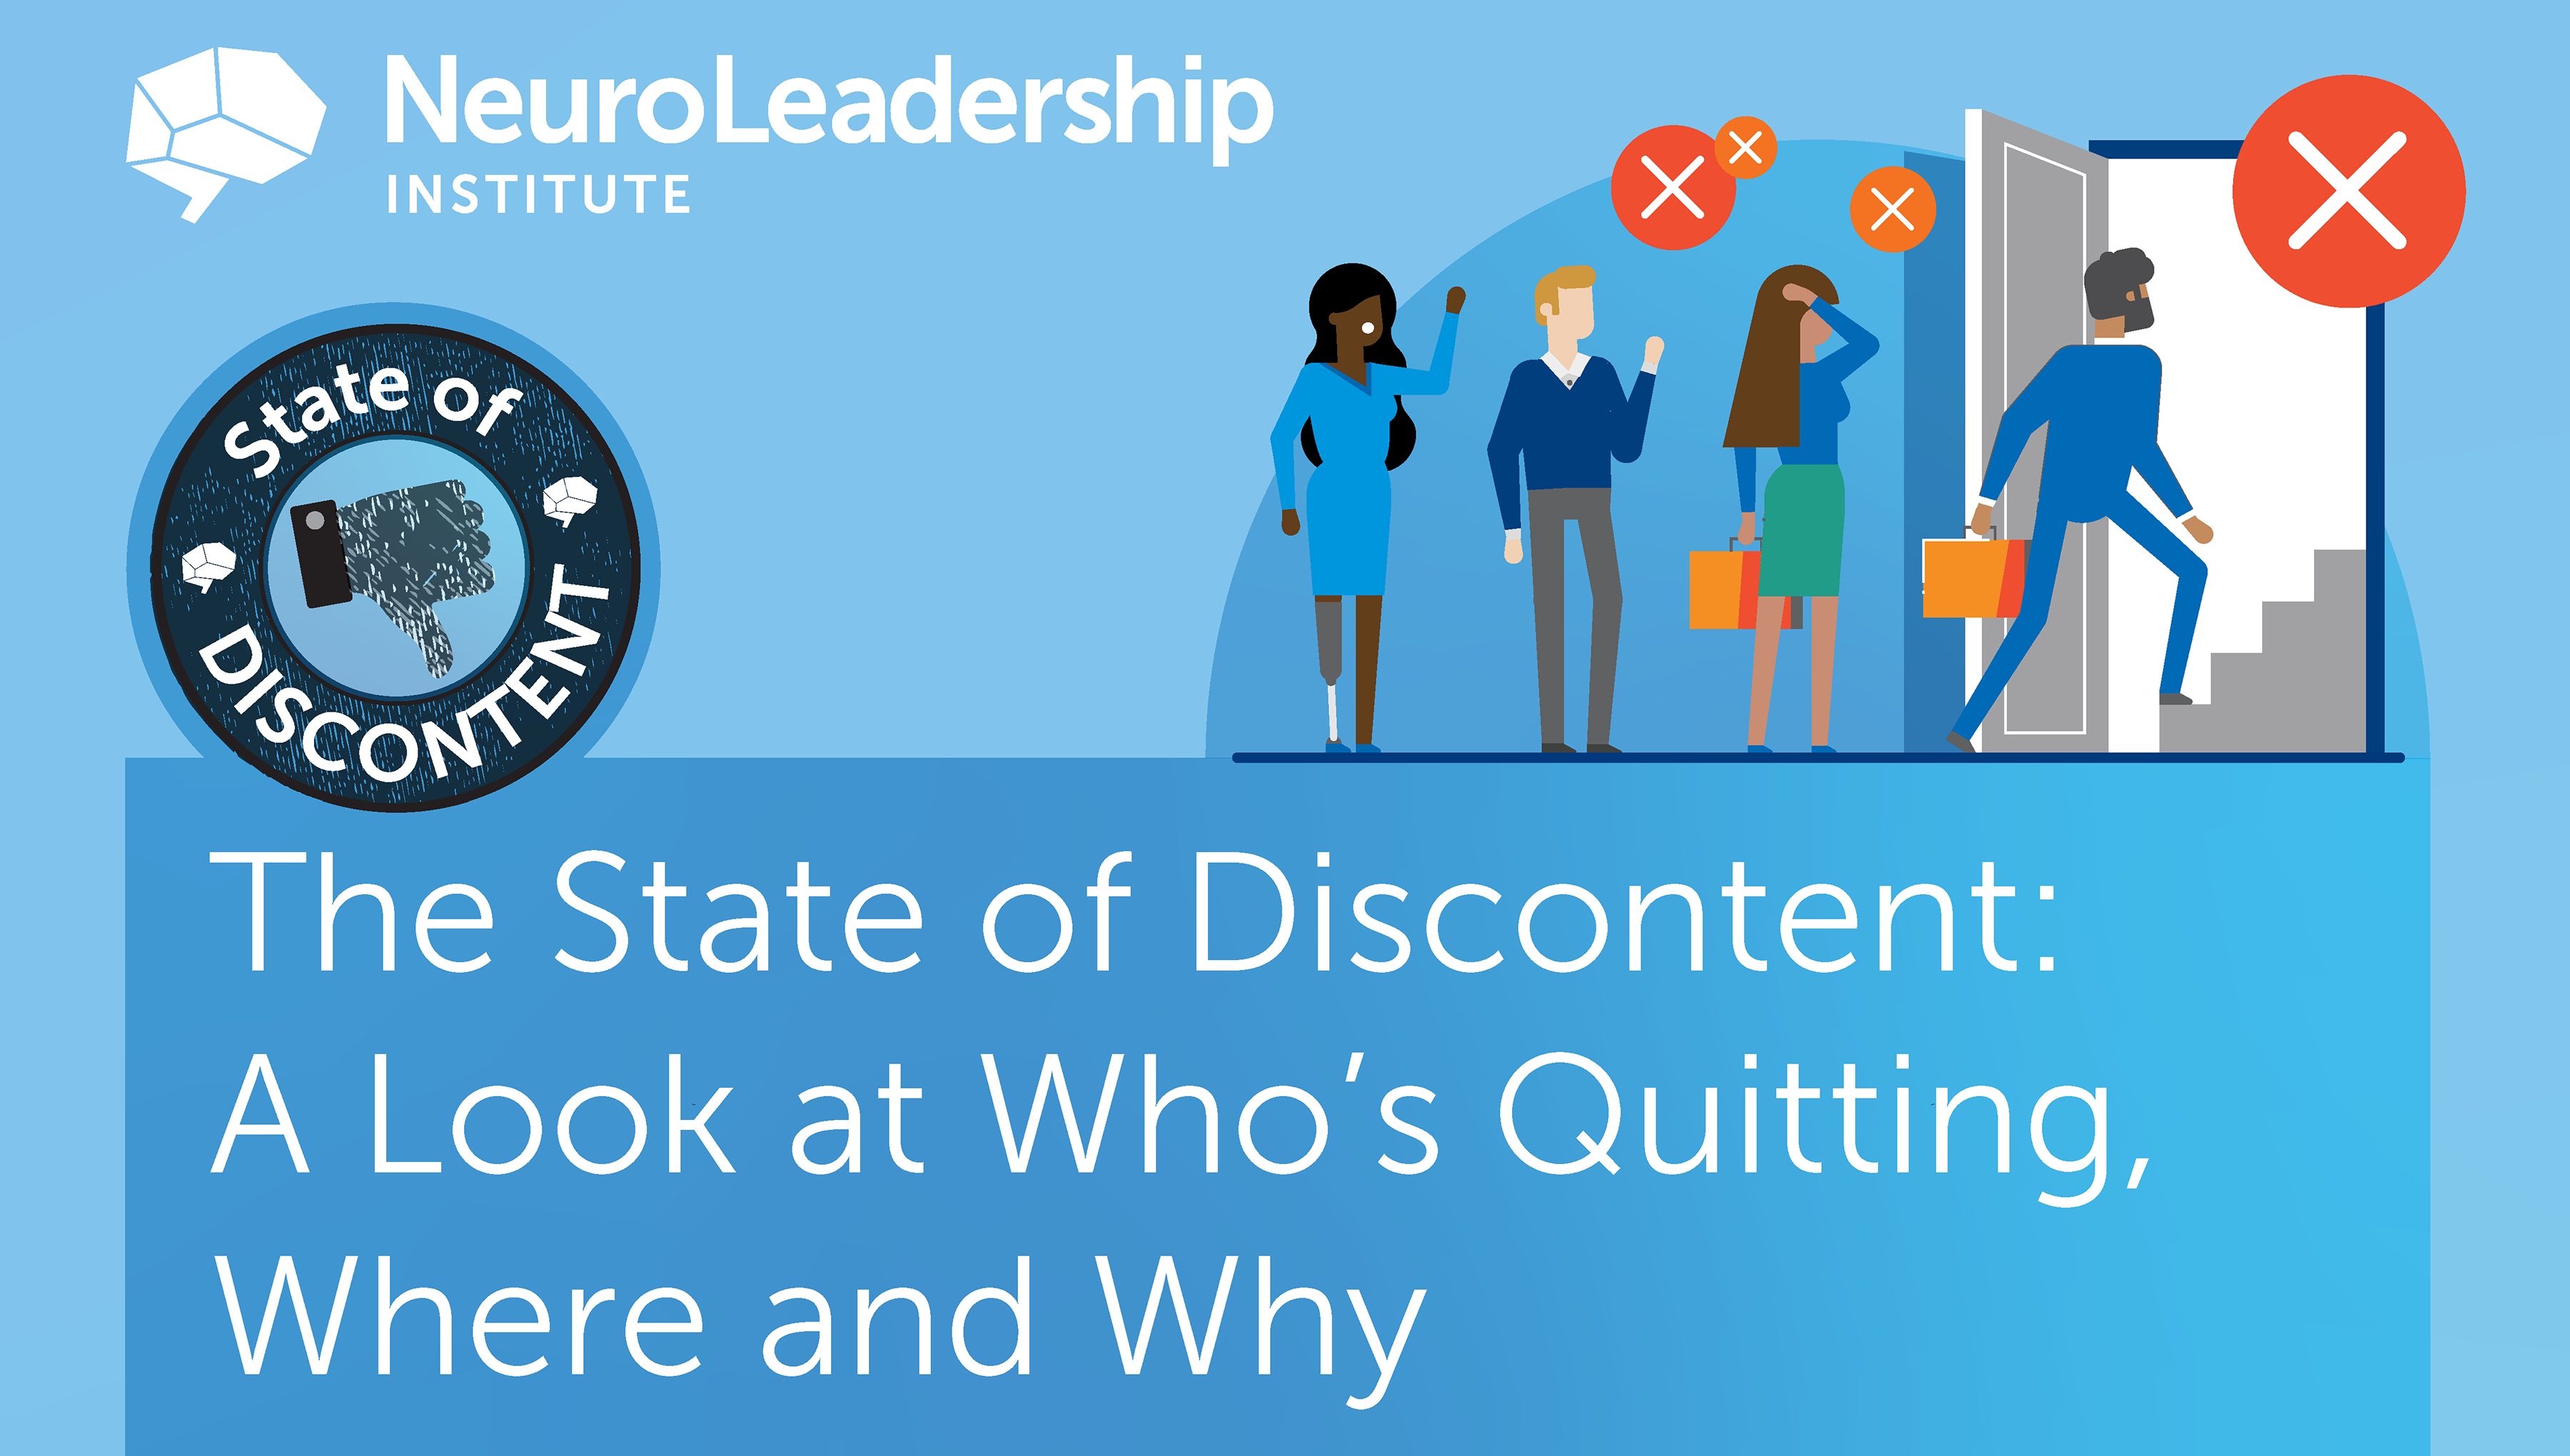 State of Discontent article title